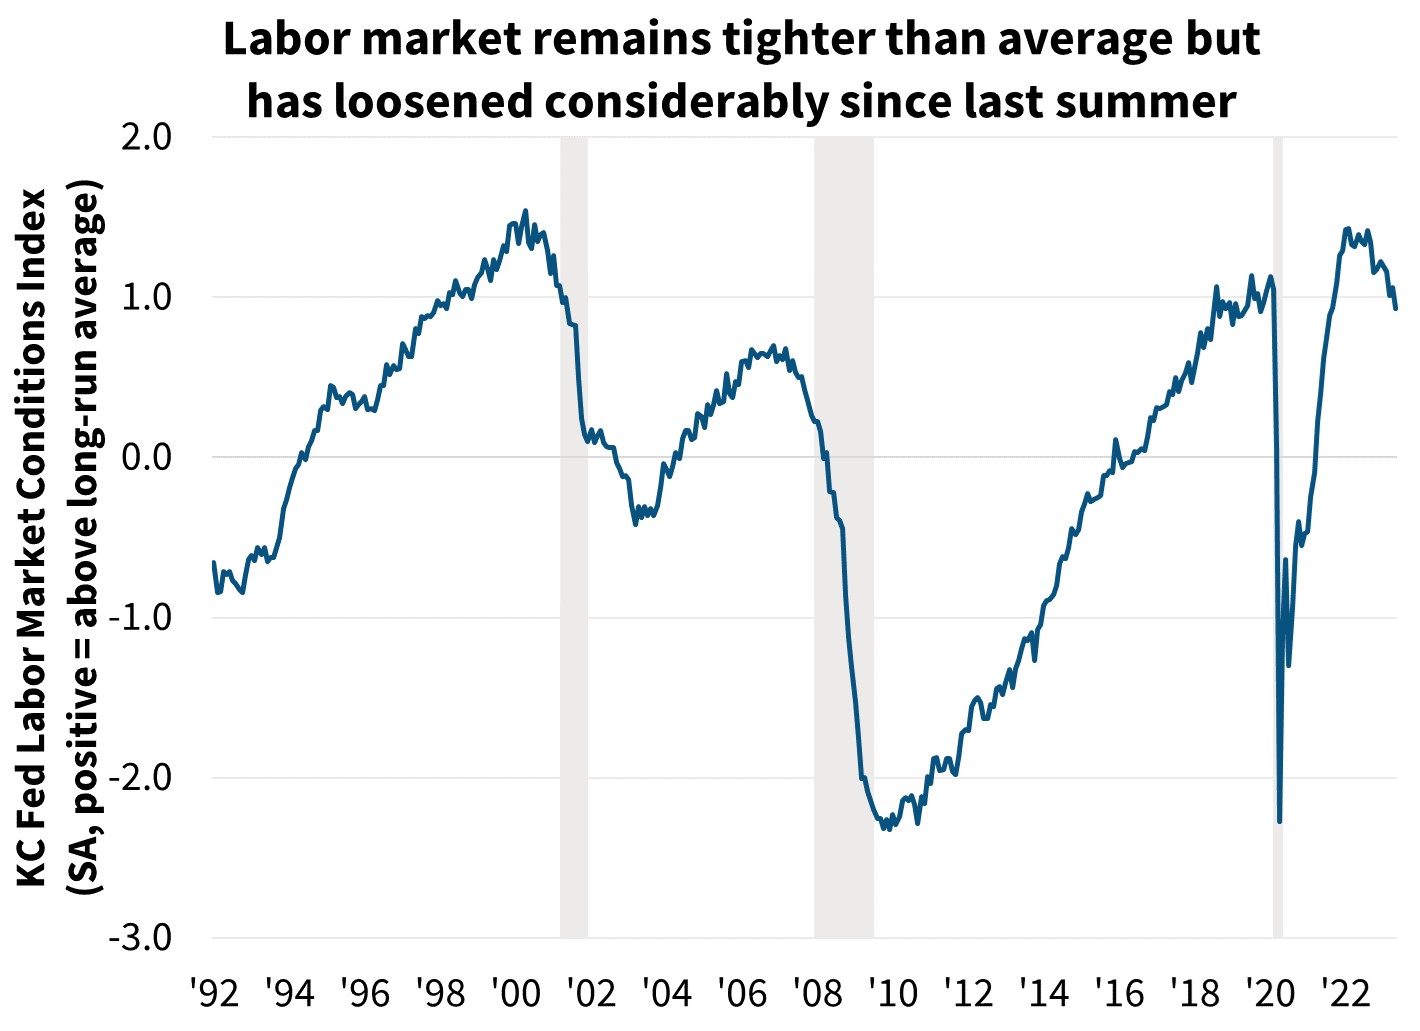  Labor market remains tighter than average but has loosened considerably since last summer 